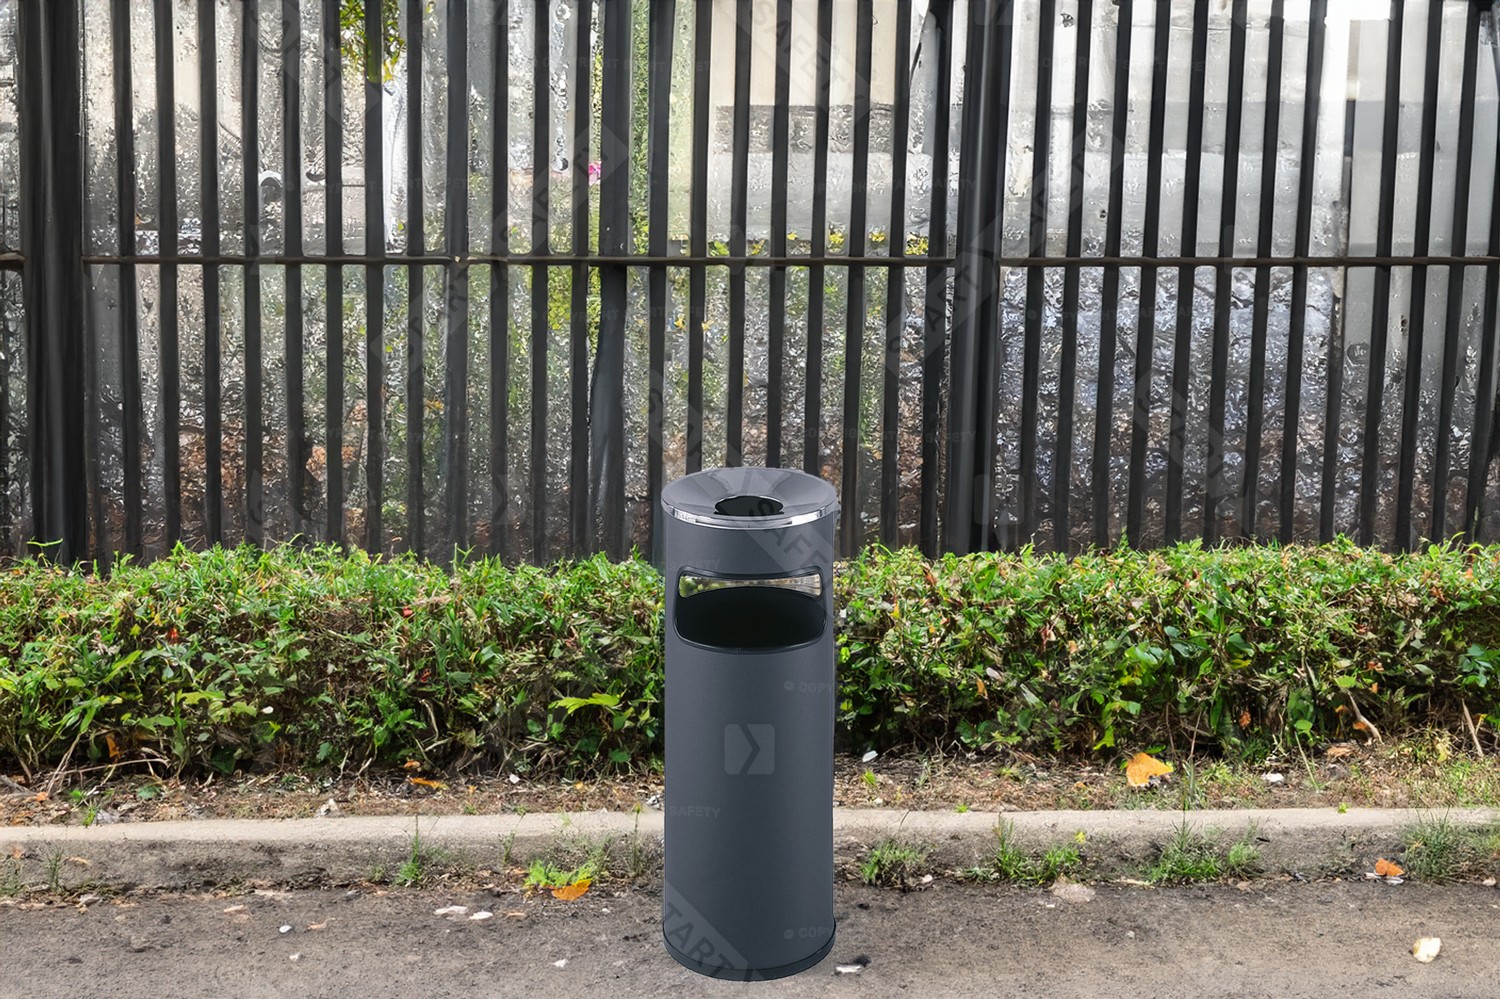 Procity Ashtray Litter Bin Installed In Public Setting In A Car Park Next To Fence